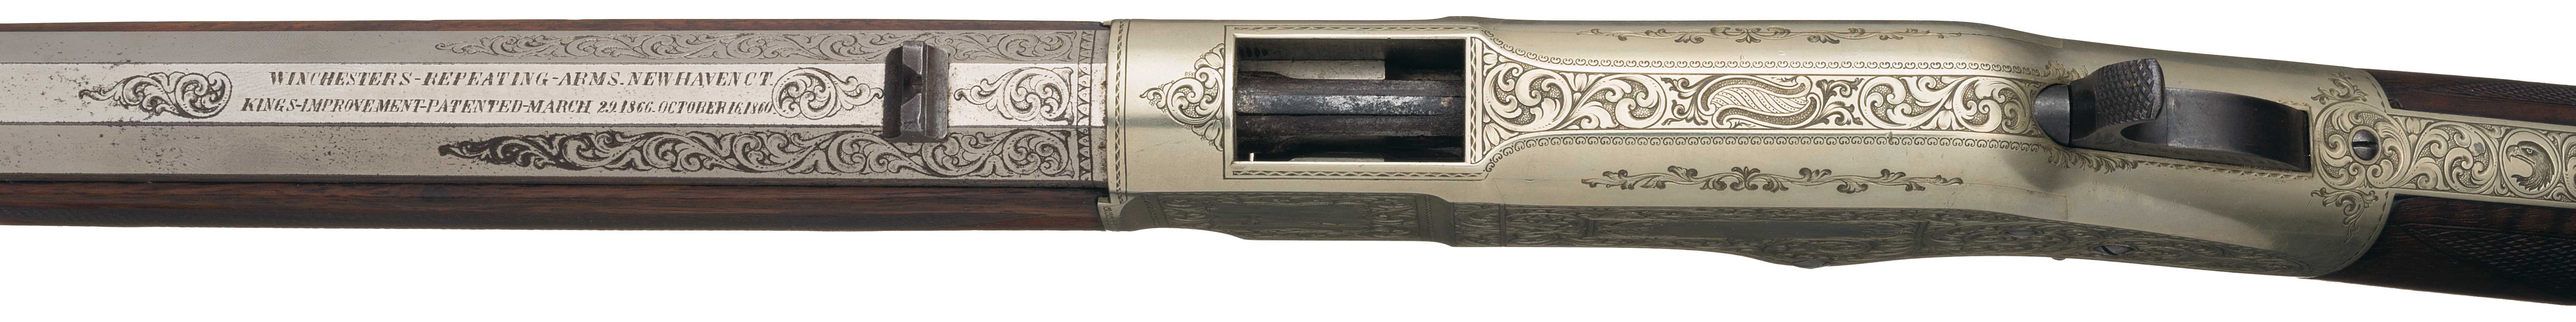 Top view of Ira Paine's 1866 Winchester. As can be seen from the differences in the color of the metal the receiver is silver and the steel barrel is nickel plated.